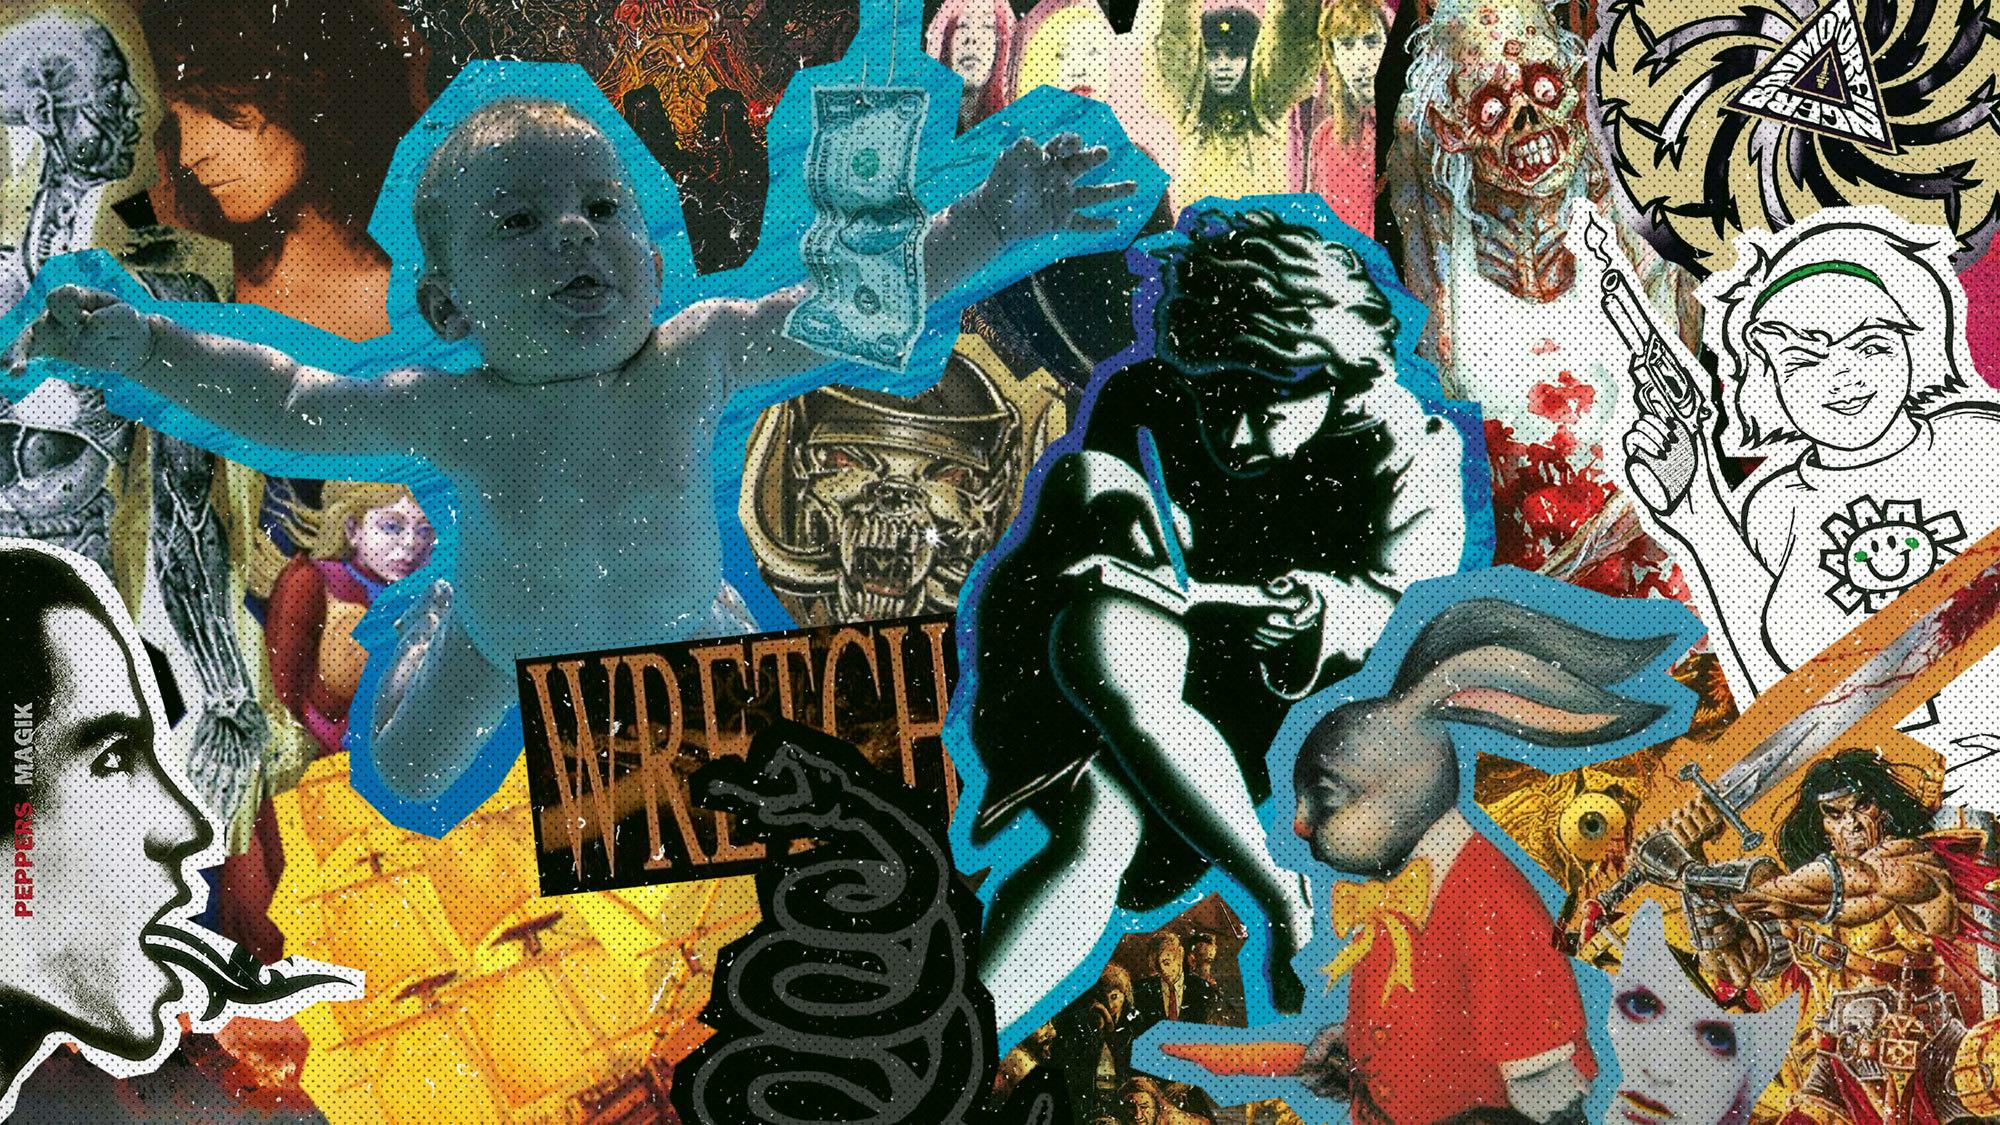 The 50 best albums from 1991